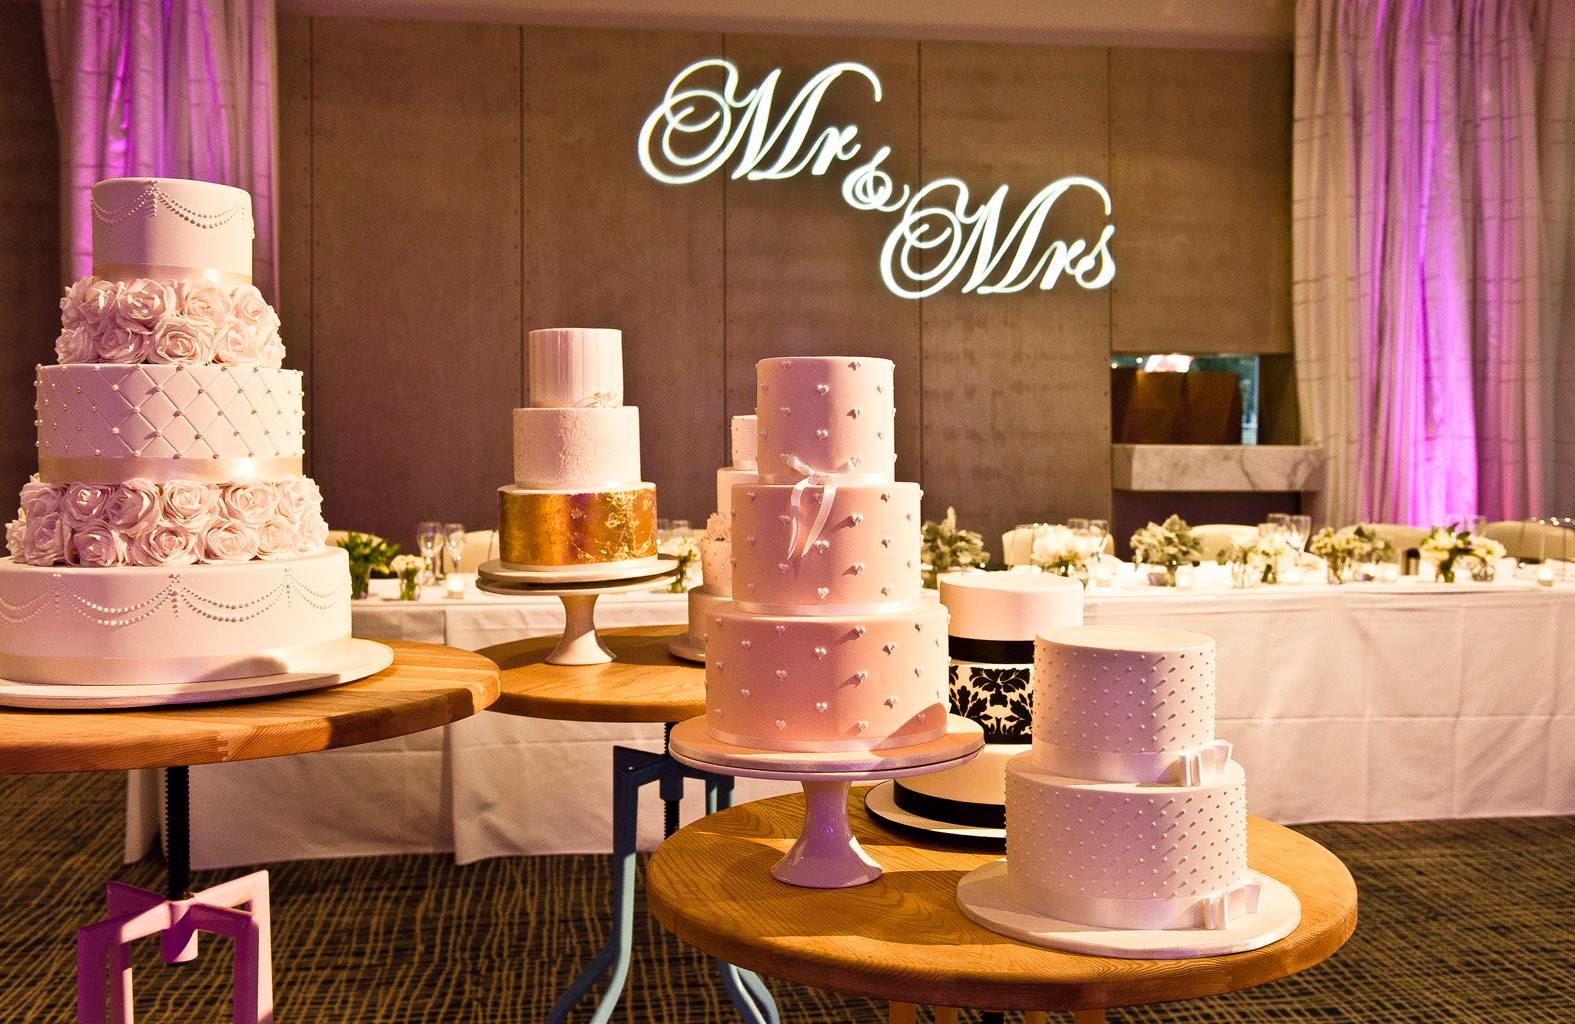 Ab Fab Cakes - 5 Excellent Wedding Cake Suppliers in Melbourne